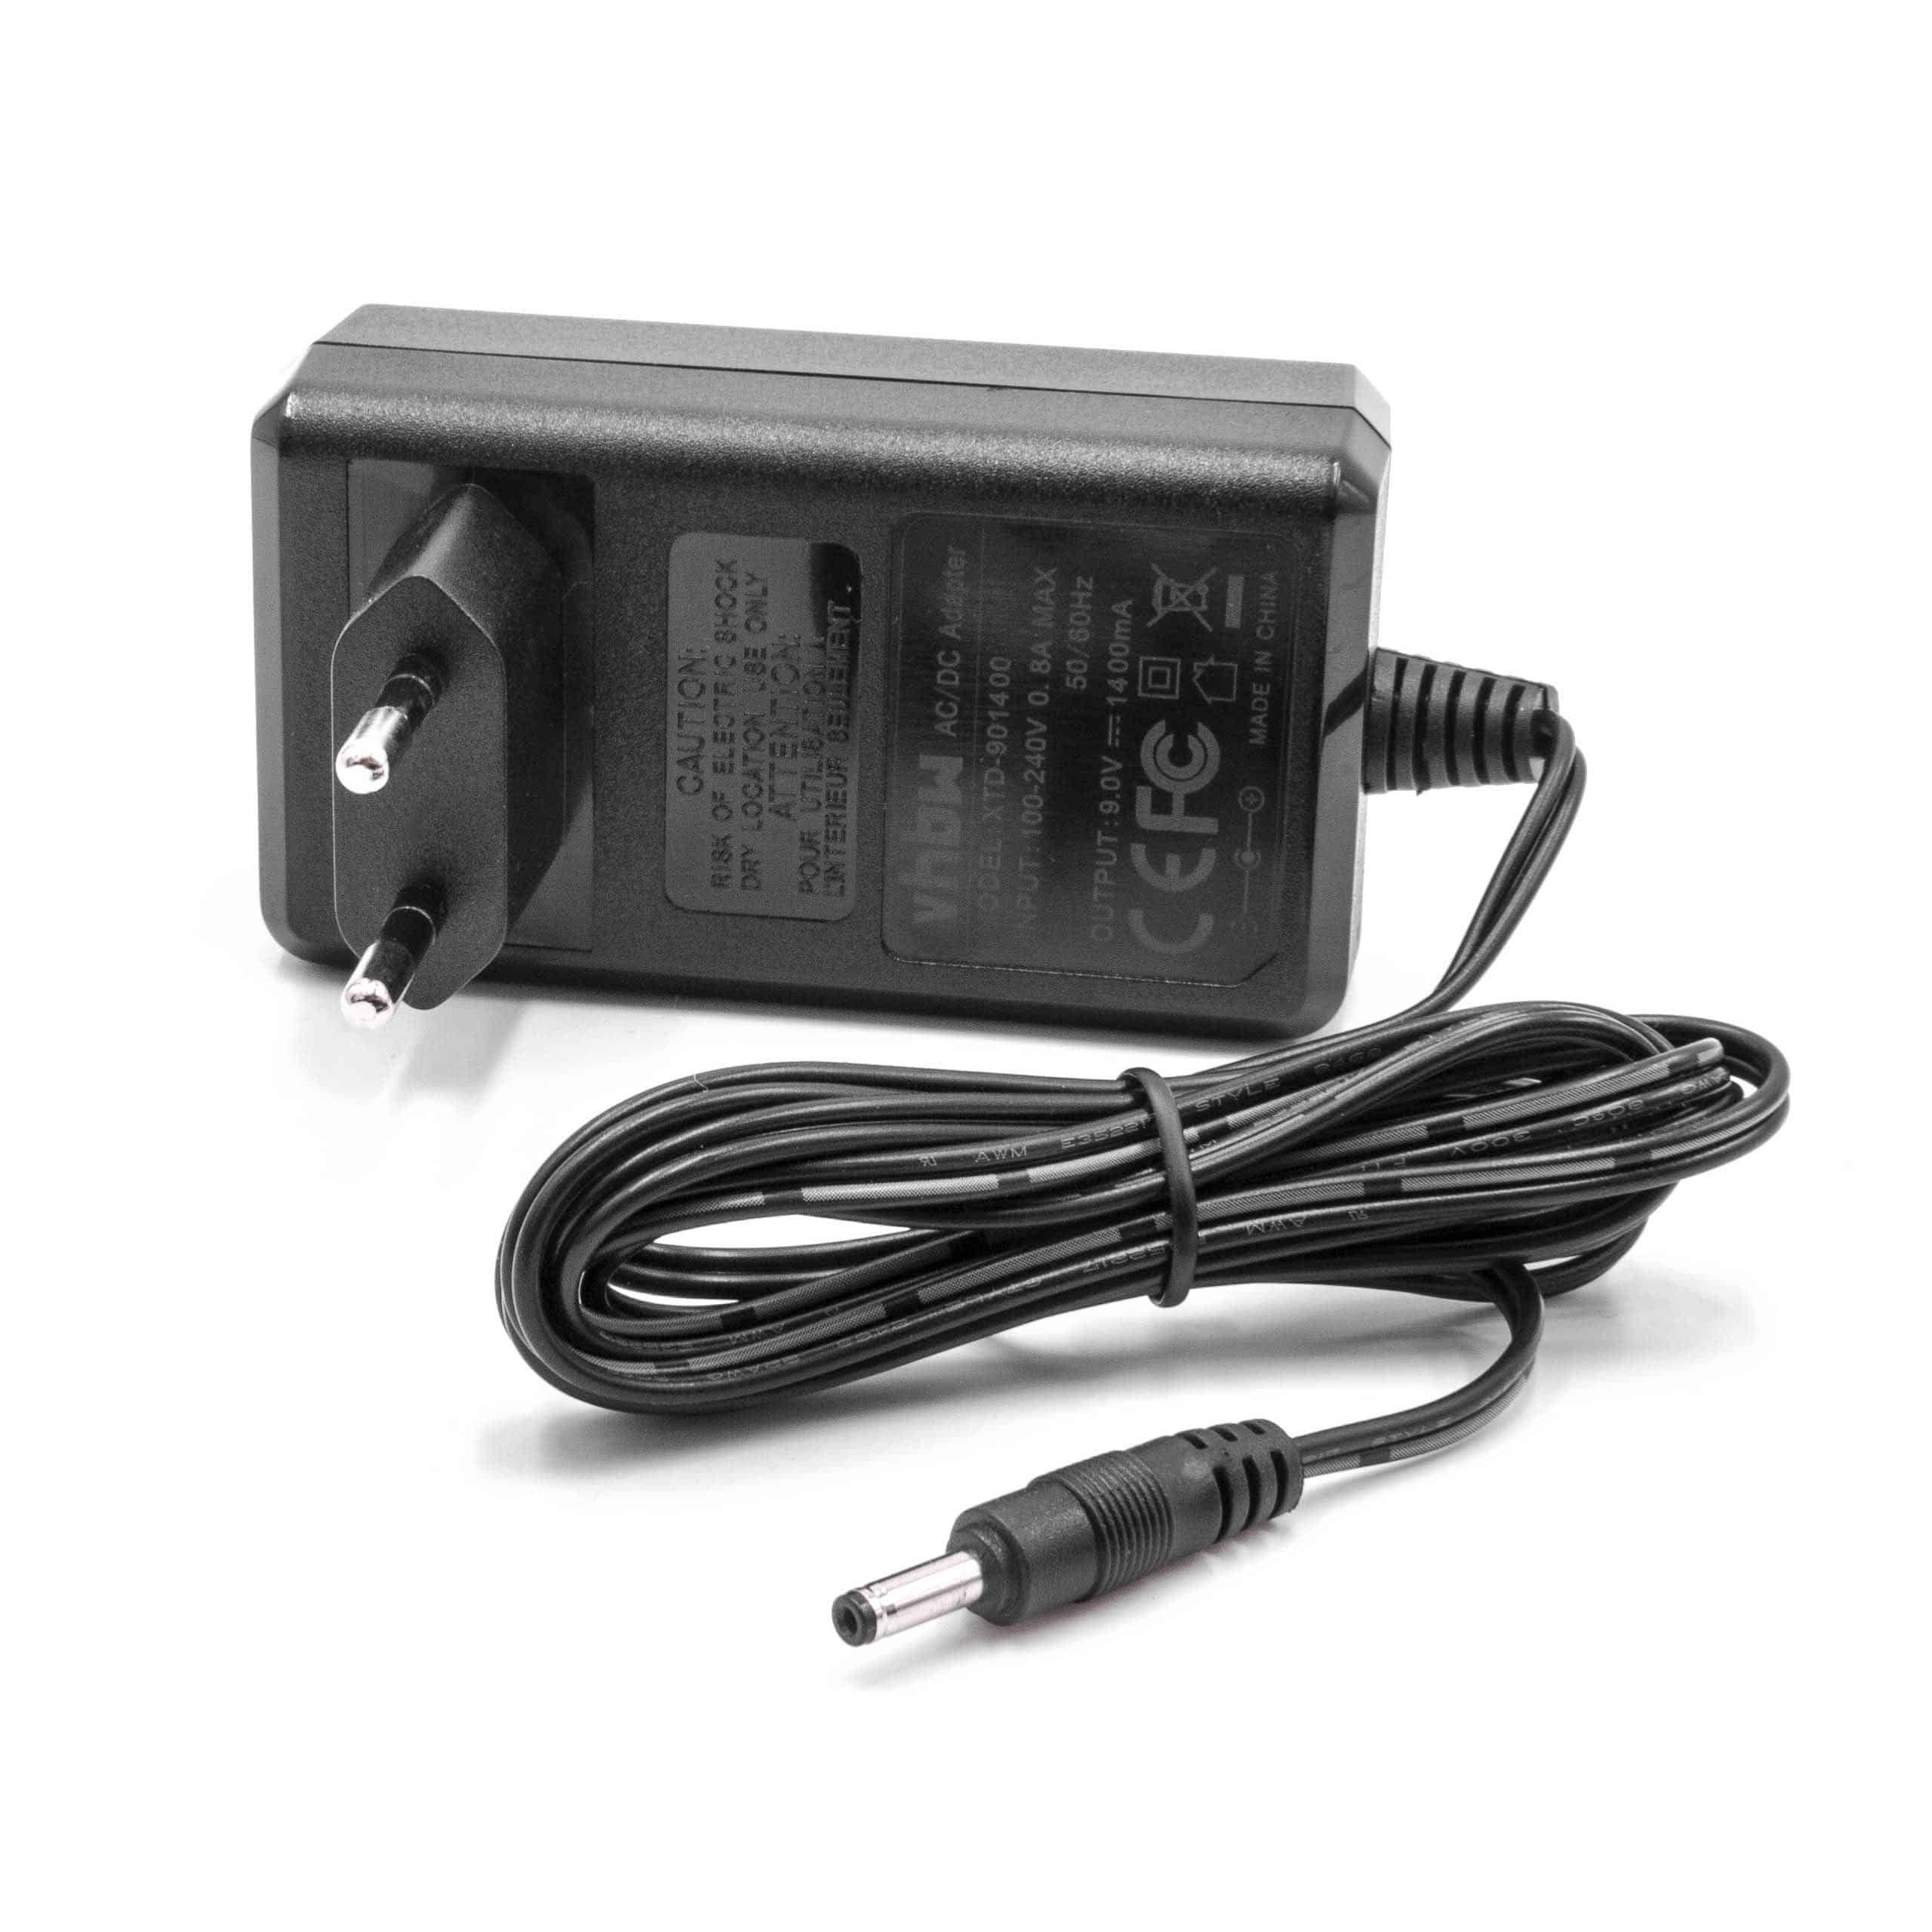 Mains Power Adapter replaces Compex 683010 for Compex Muscle Stimulator, Electro-Stimulator - 200 cm